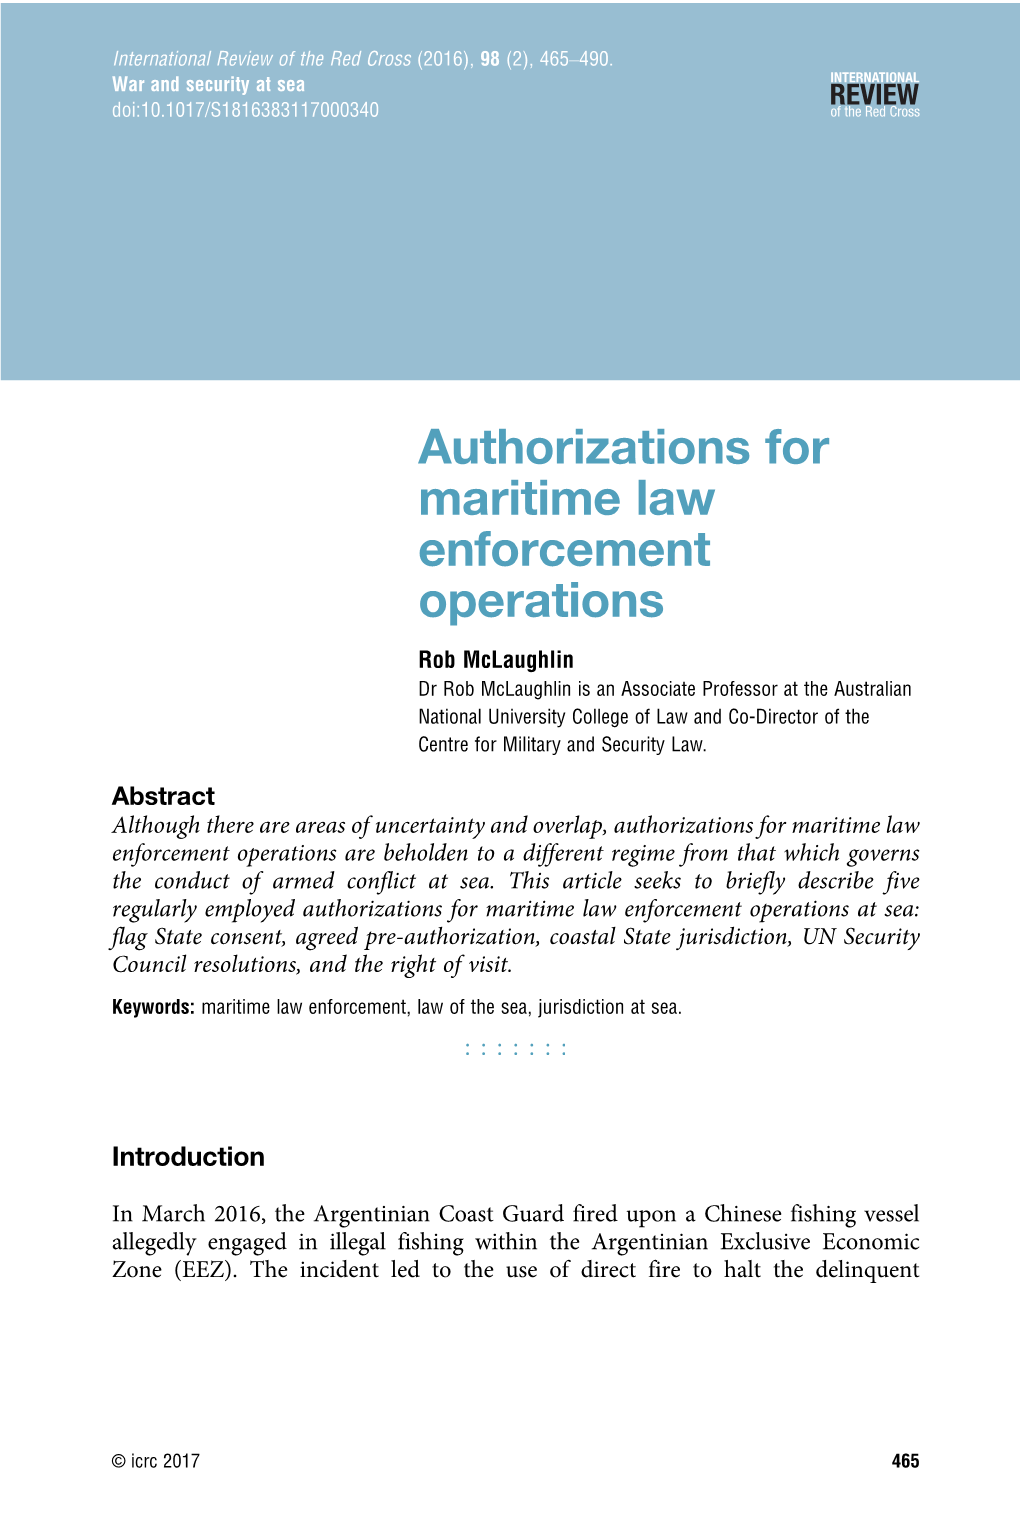 Authorizations for Maritime Law Enforcement Operations